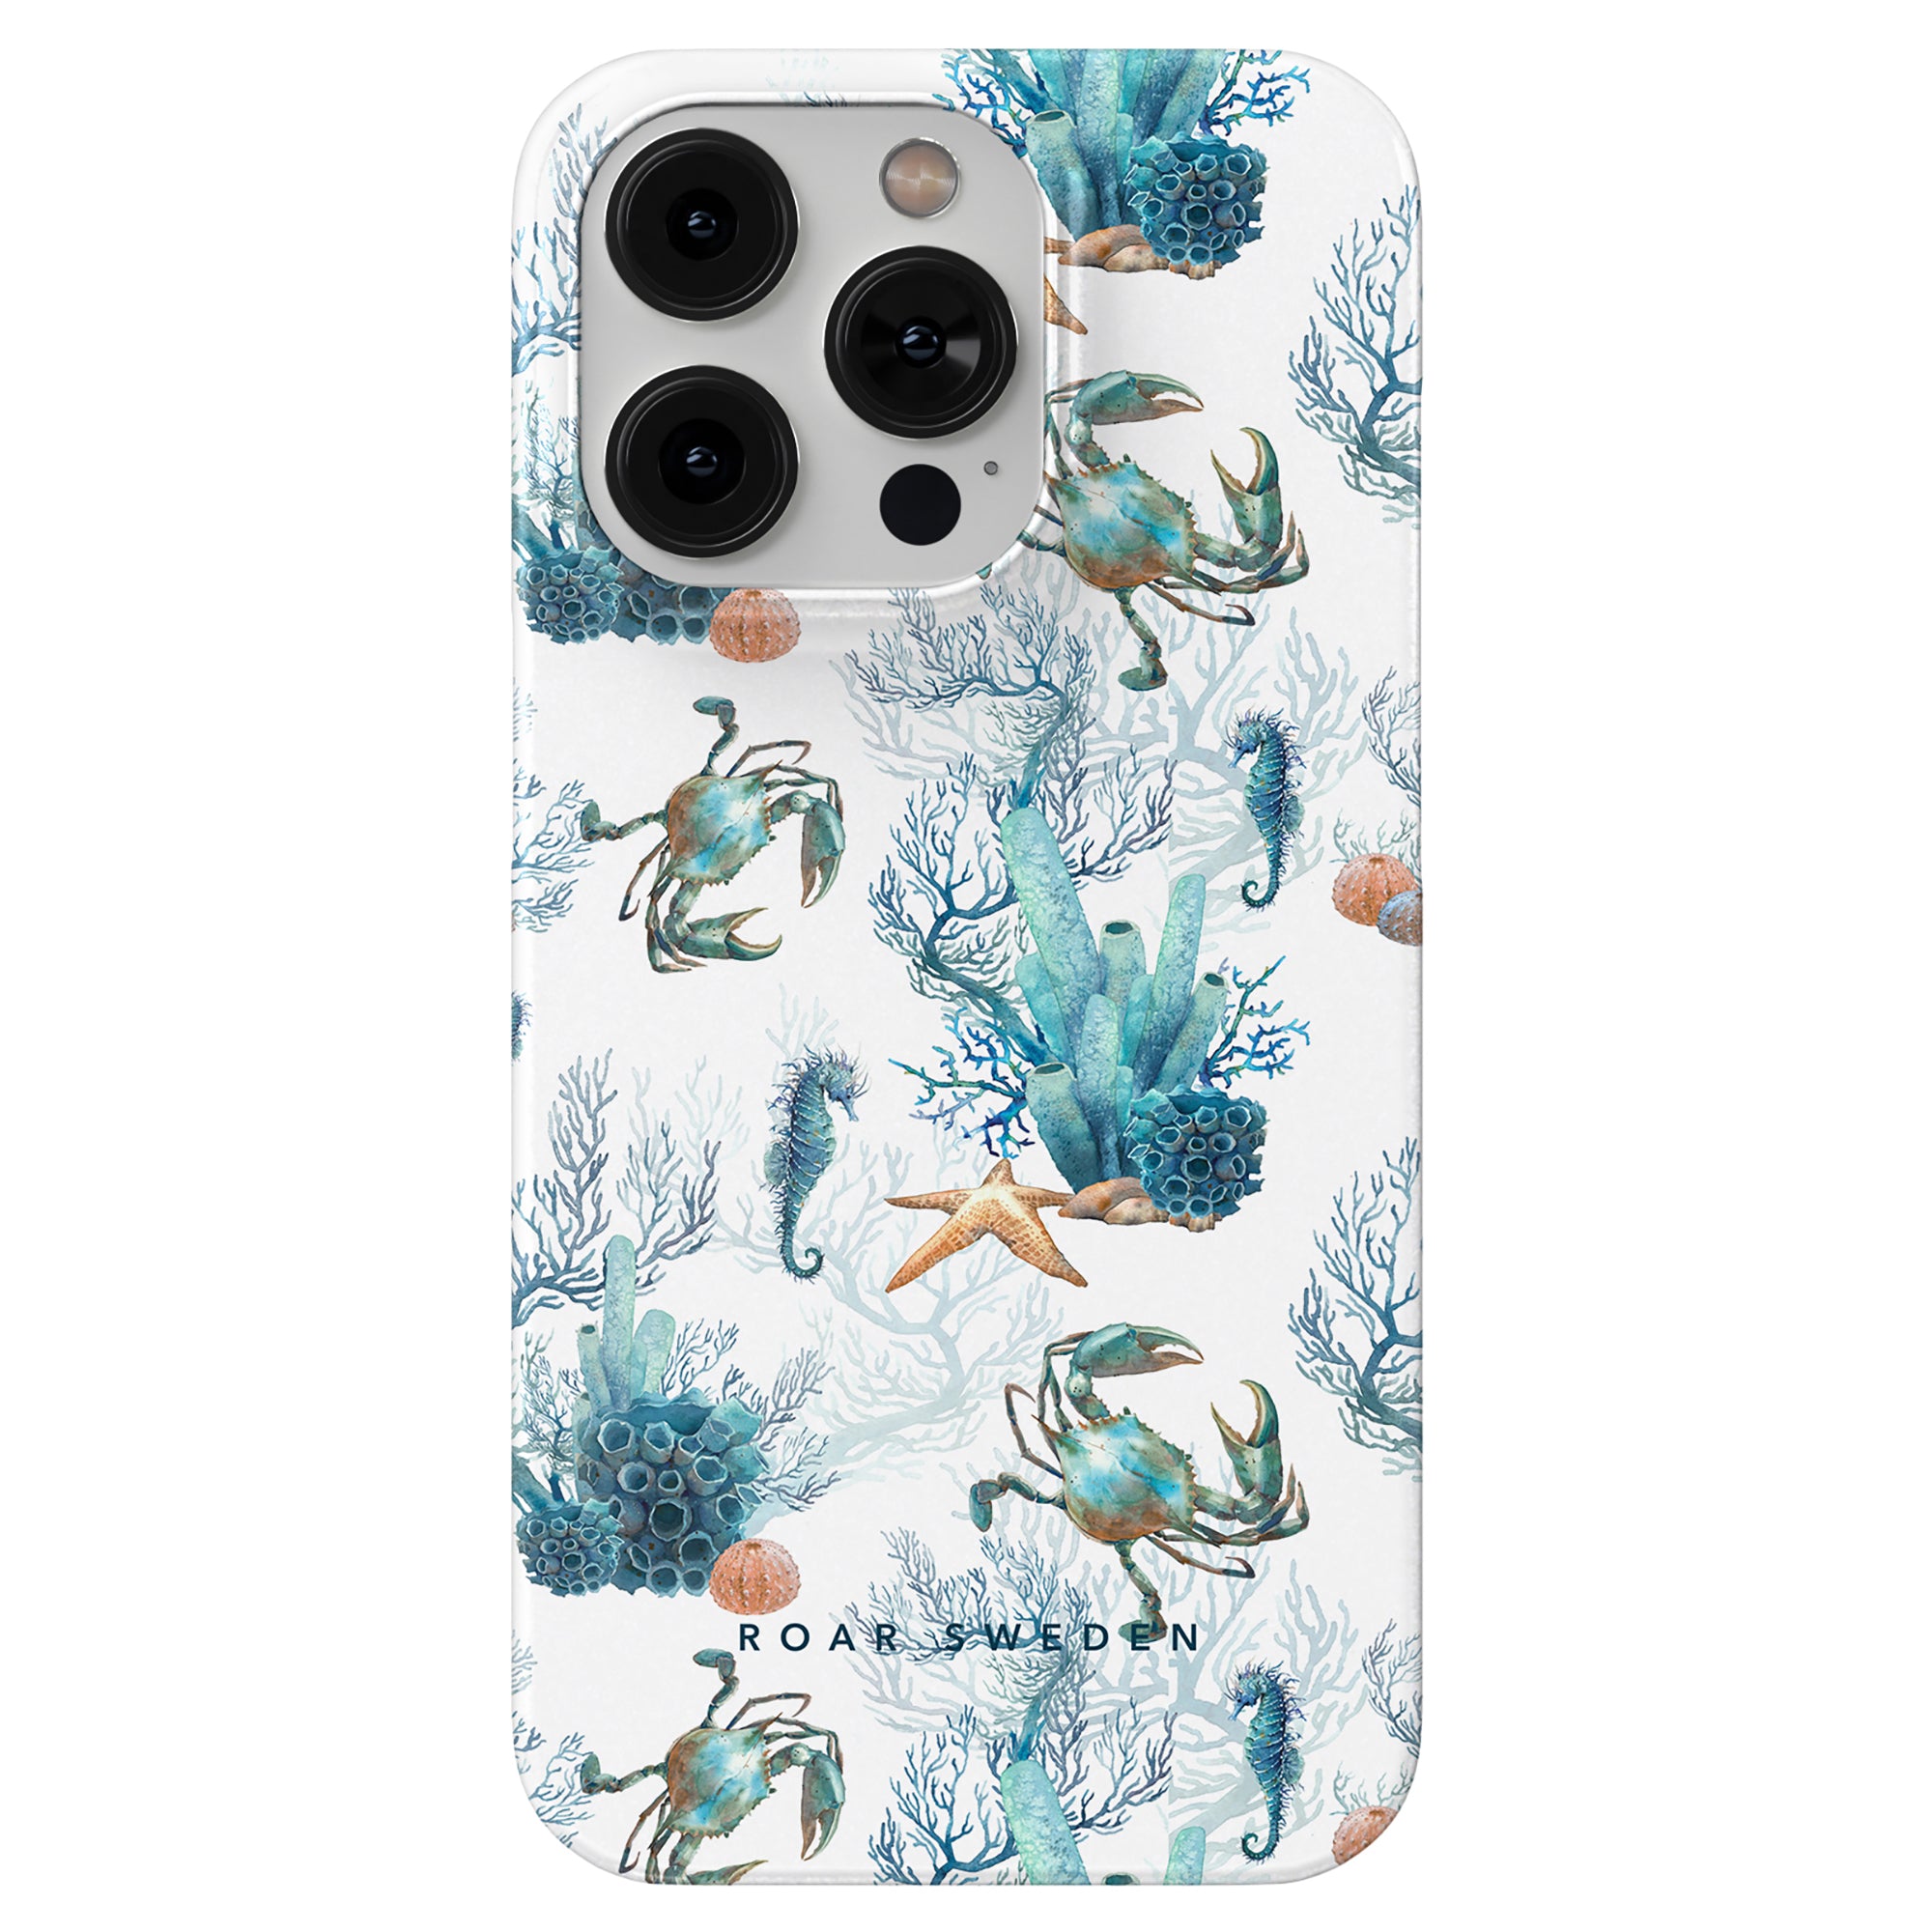 A smartphone case with an SEO-optimized Crab Reef - Slim case showcasing a marine-themed design featuring crabs, coral, and starfish.